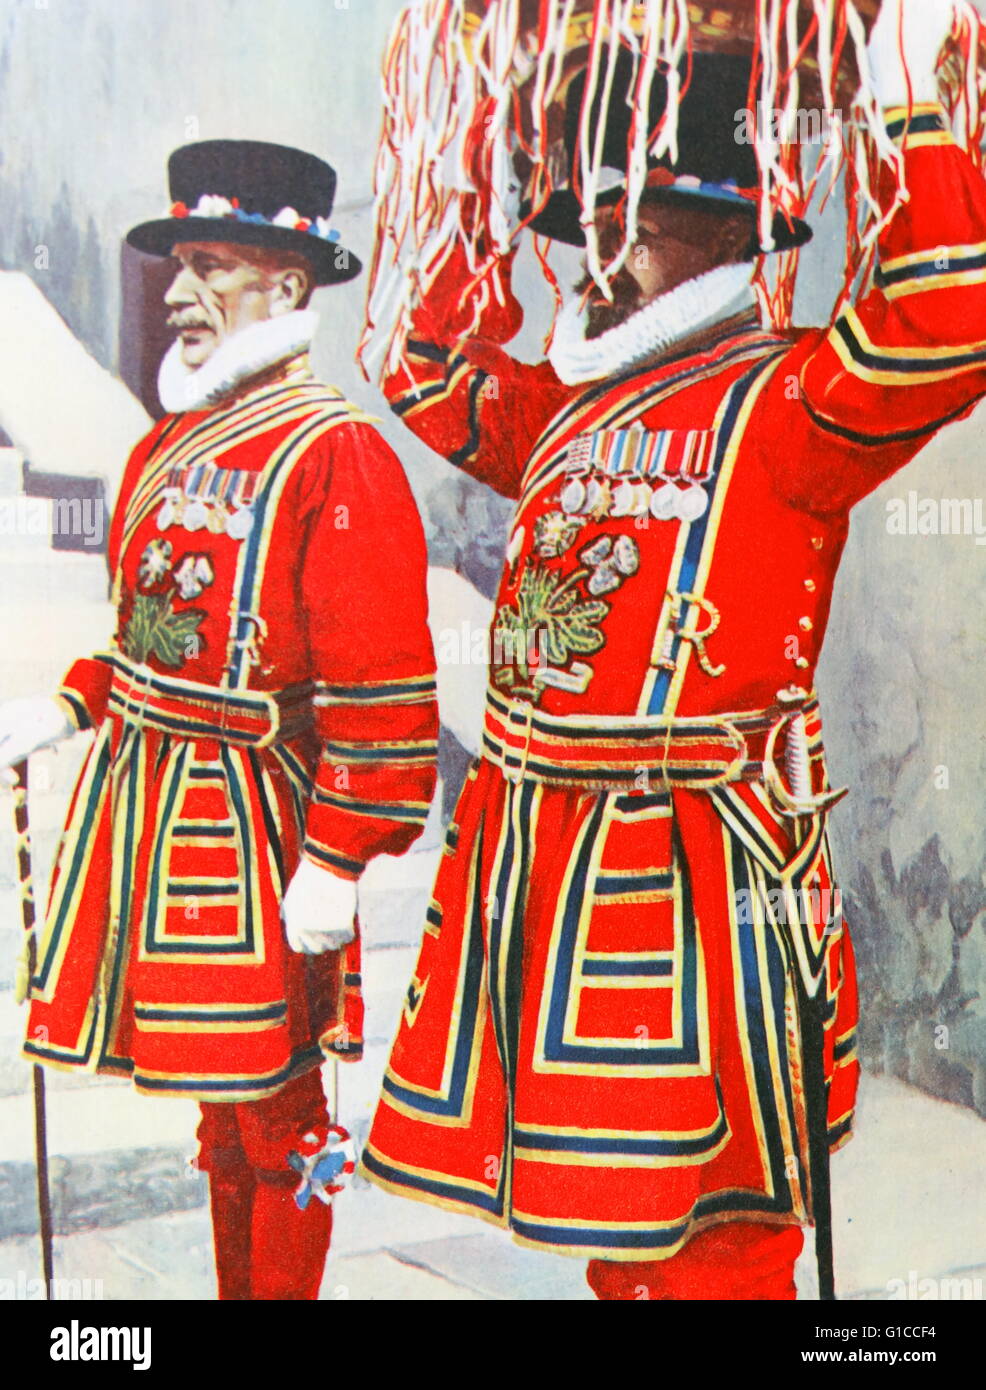 Yeoman Of The Guard auf den Tower of London am Gründonnerstag Montag 1930 Stockfoto